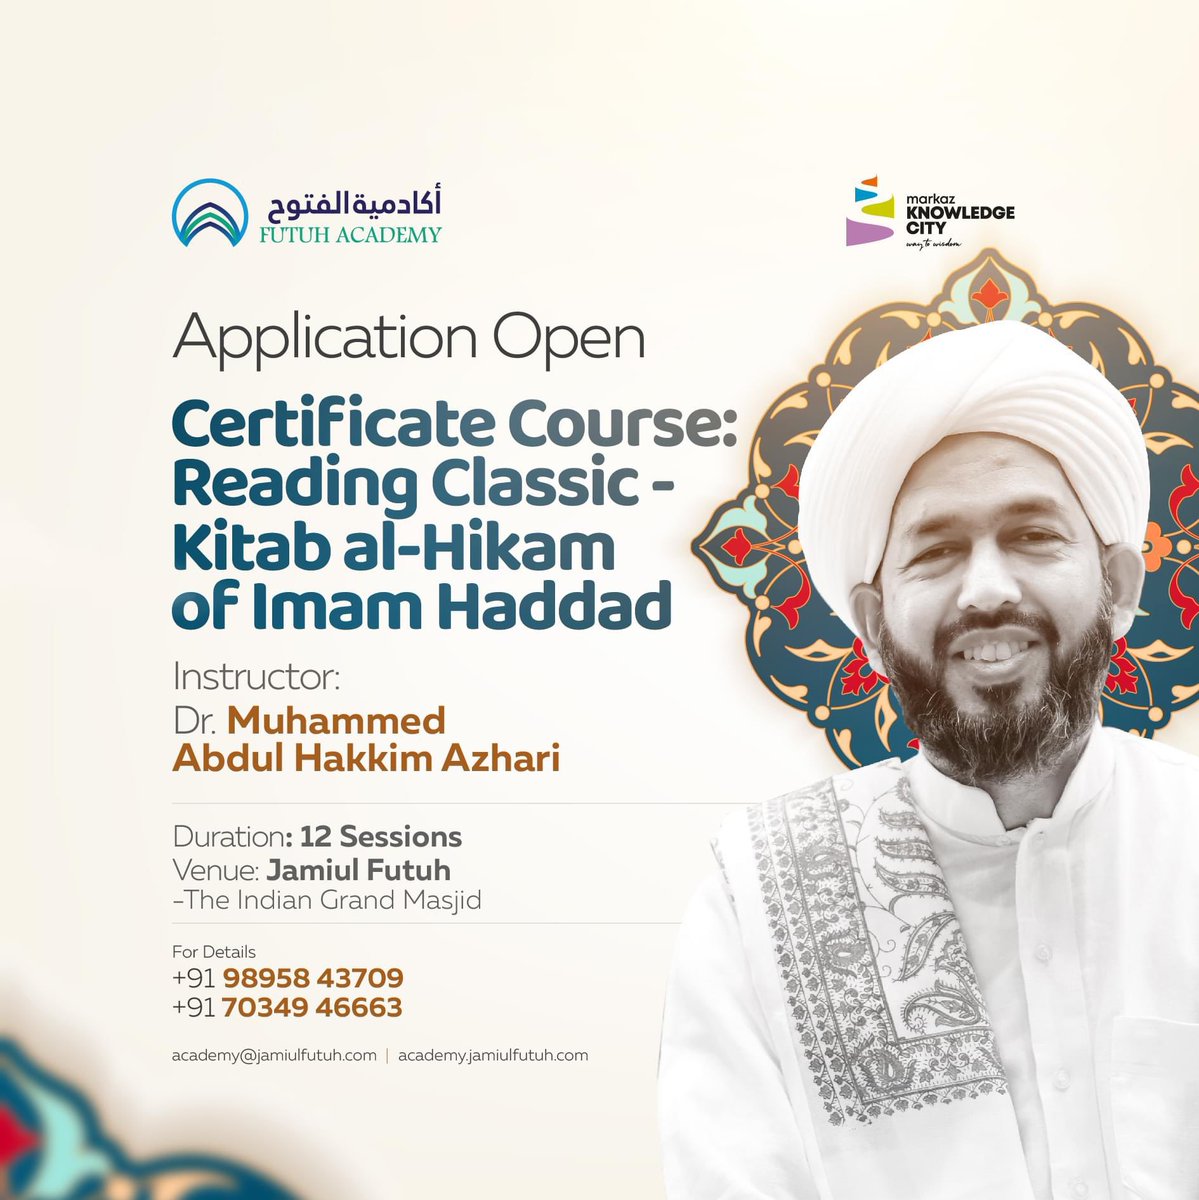 For more information and details, Call/Whatsapp at +91 98958 43709, +91 70 34 94 66 63, or email us at academy@jamiulfutuh.com.

#futuhacademy #certificatecourse #drmahazhari